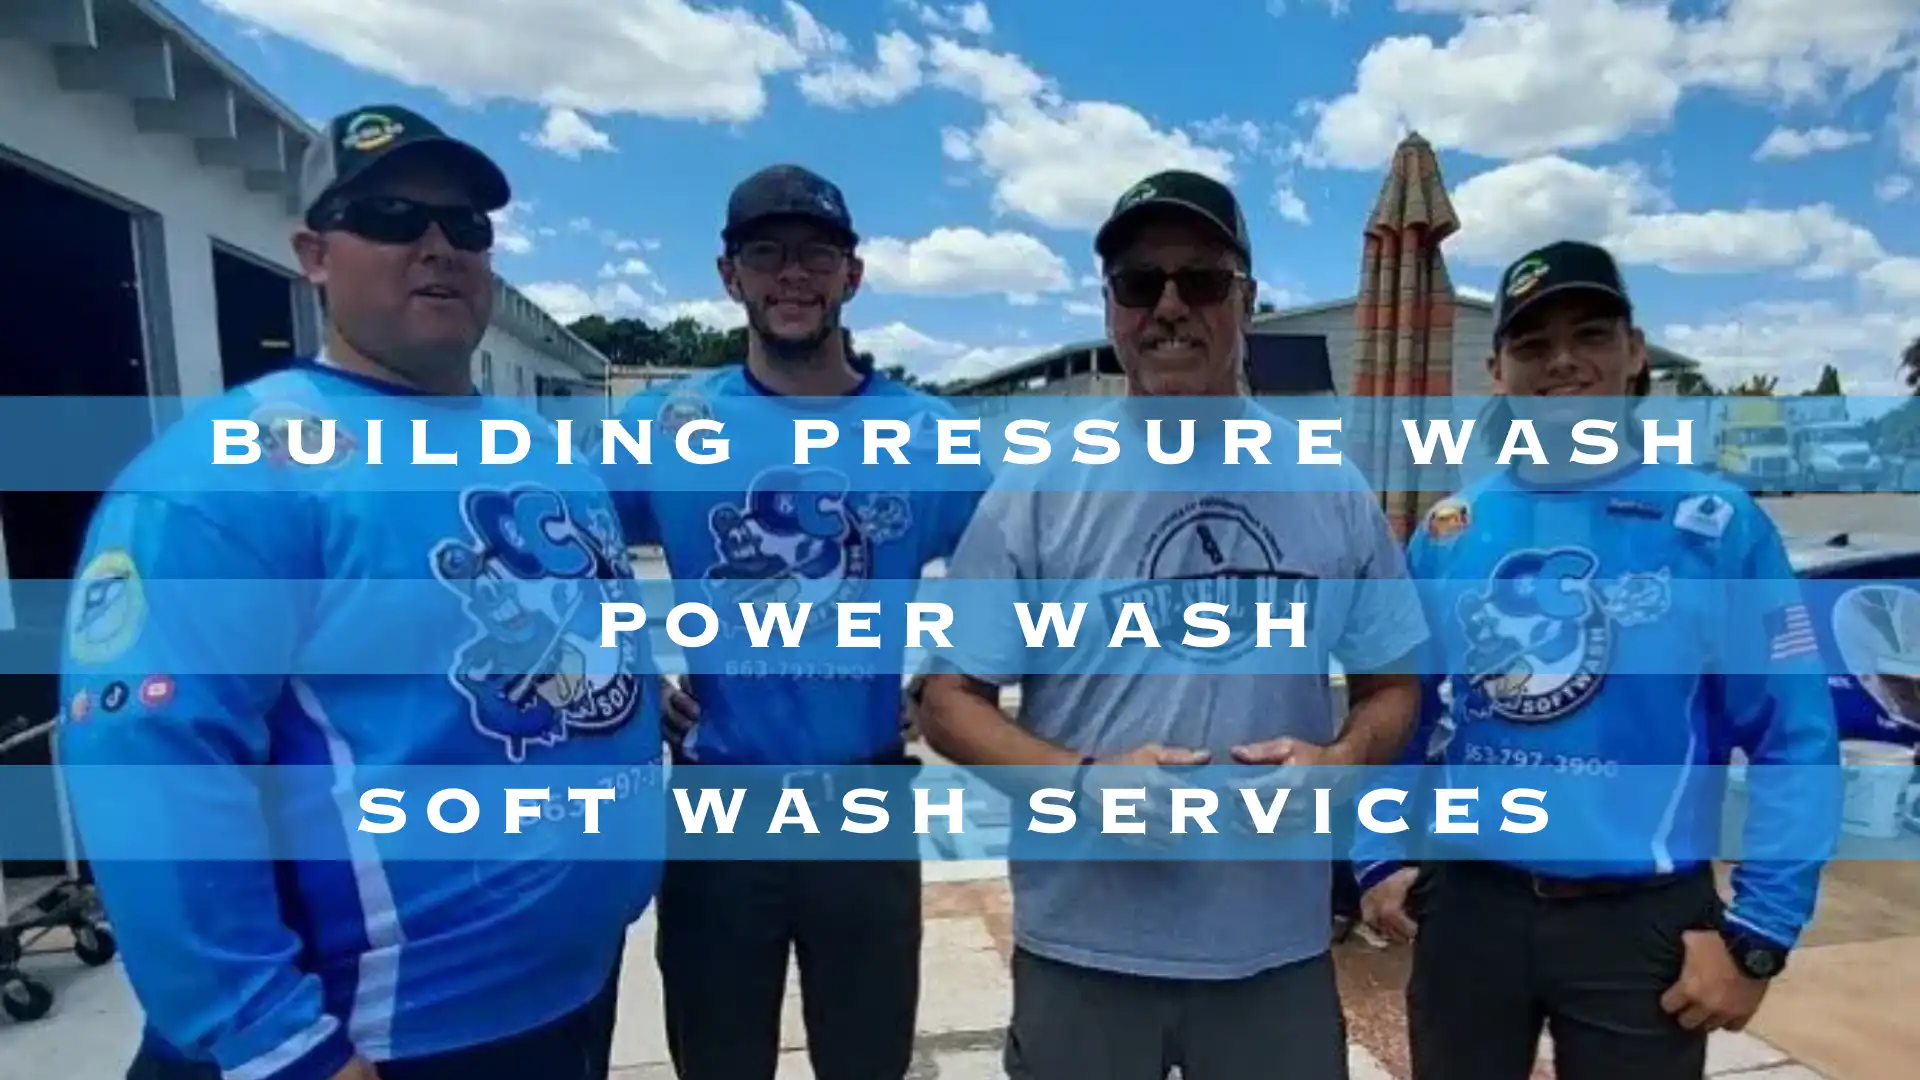 COMMERCIAL BUILDING PRESSURE WASH POWER WASH SOFT WASH SERVICES - HERO